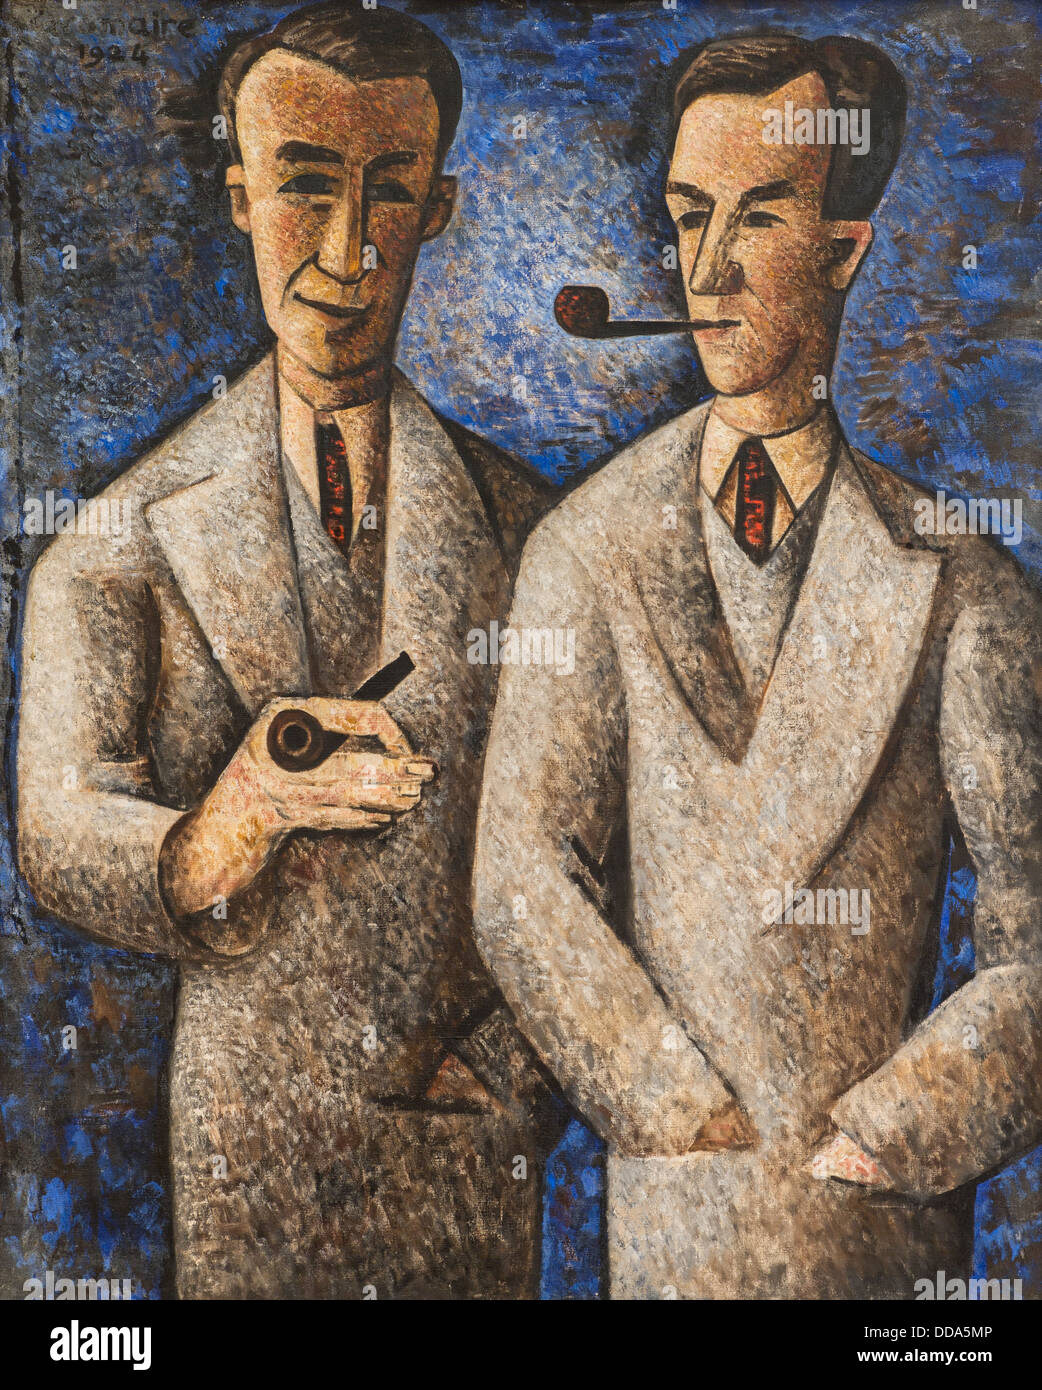 20th century  -  The Loeb brothers - Marcel Gromaire (1924) Philippe Sauvan-Magnet / Active Museum Oil on canvas Stock Photo